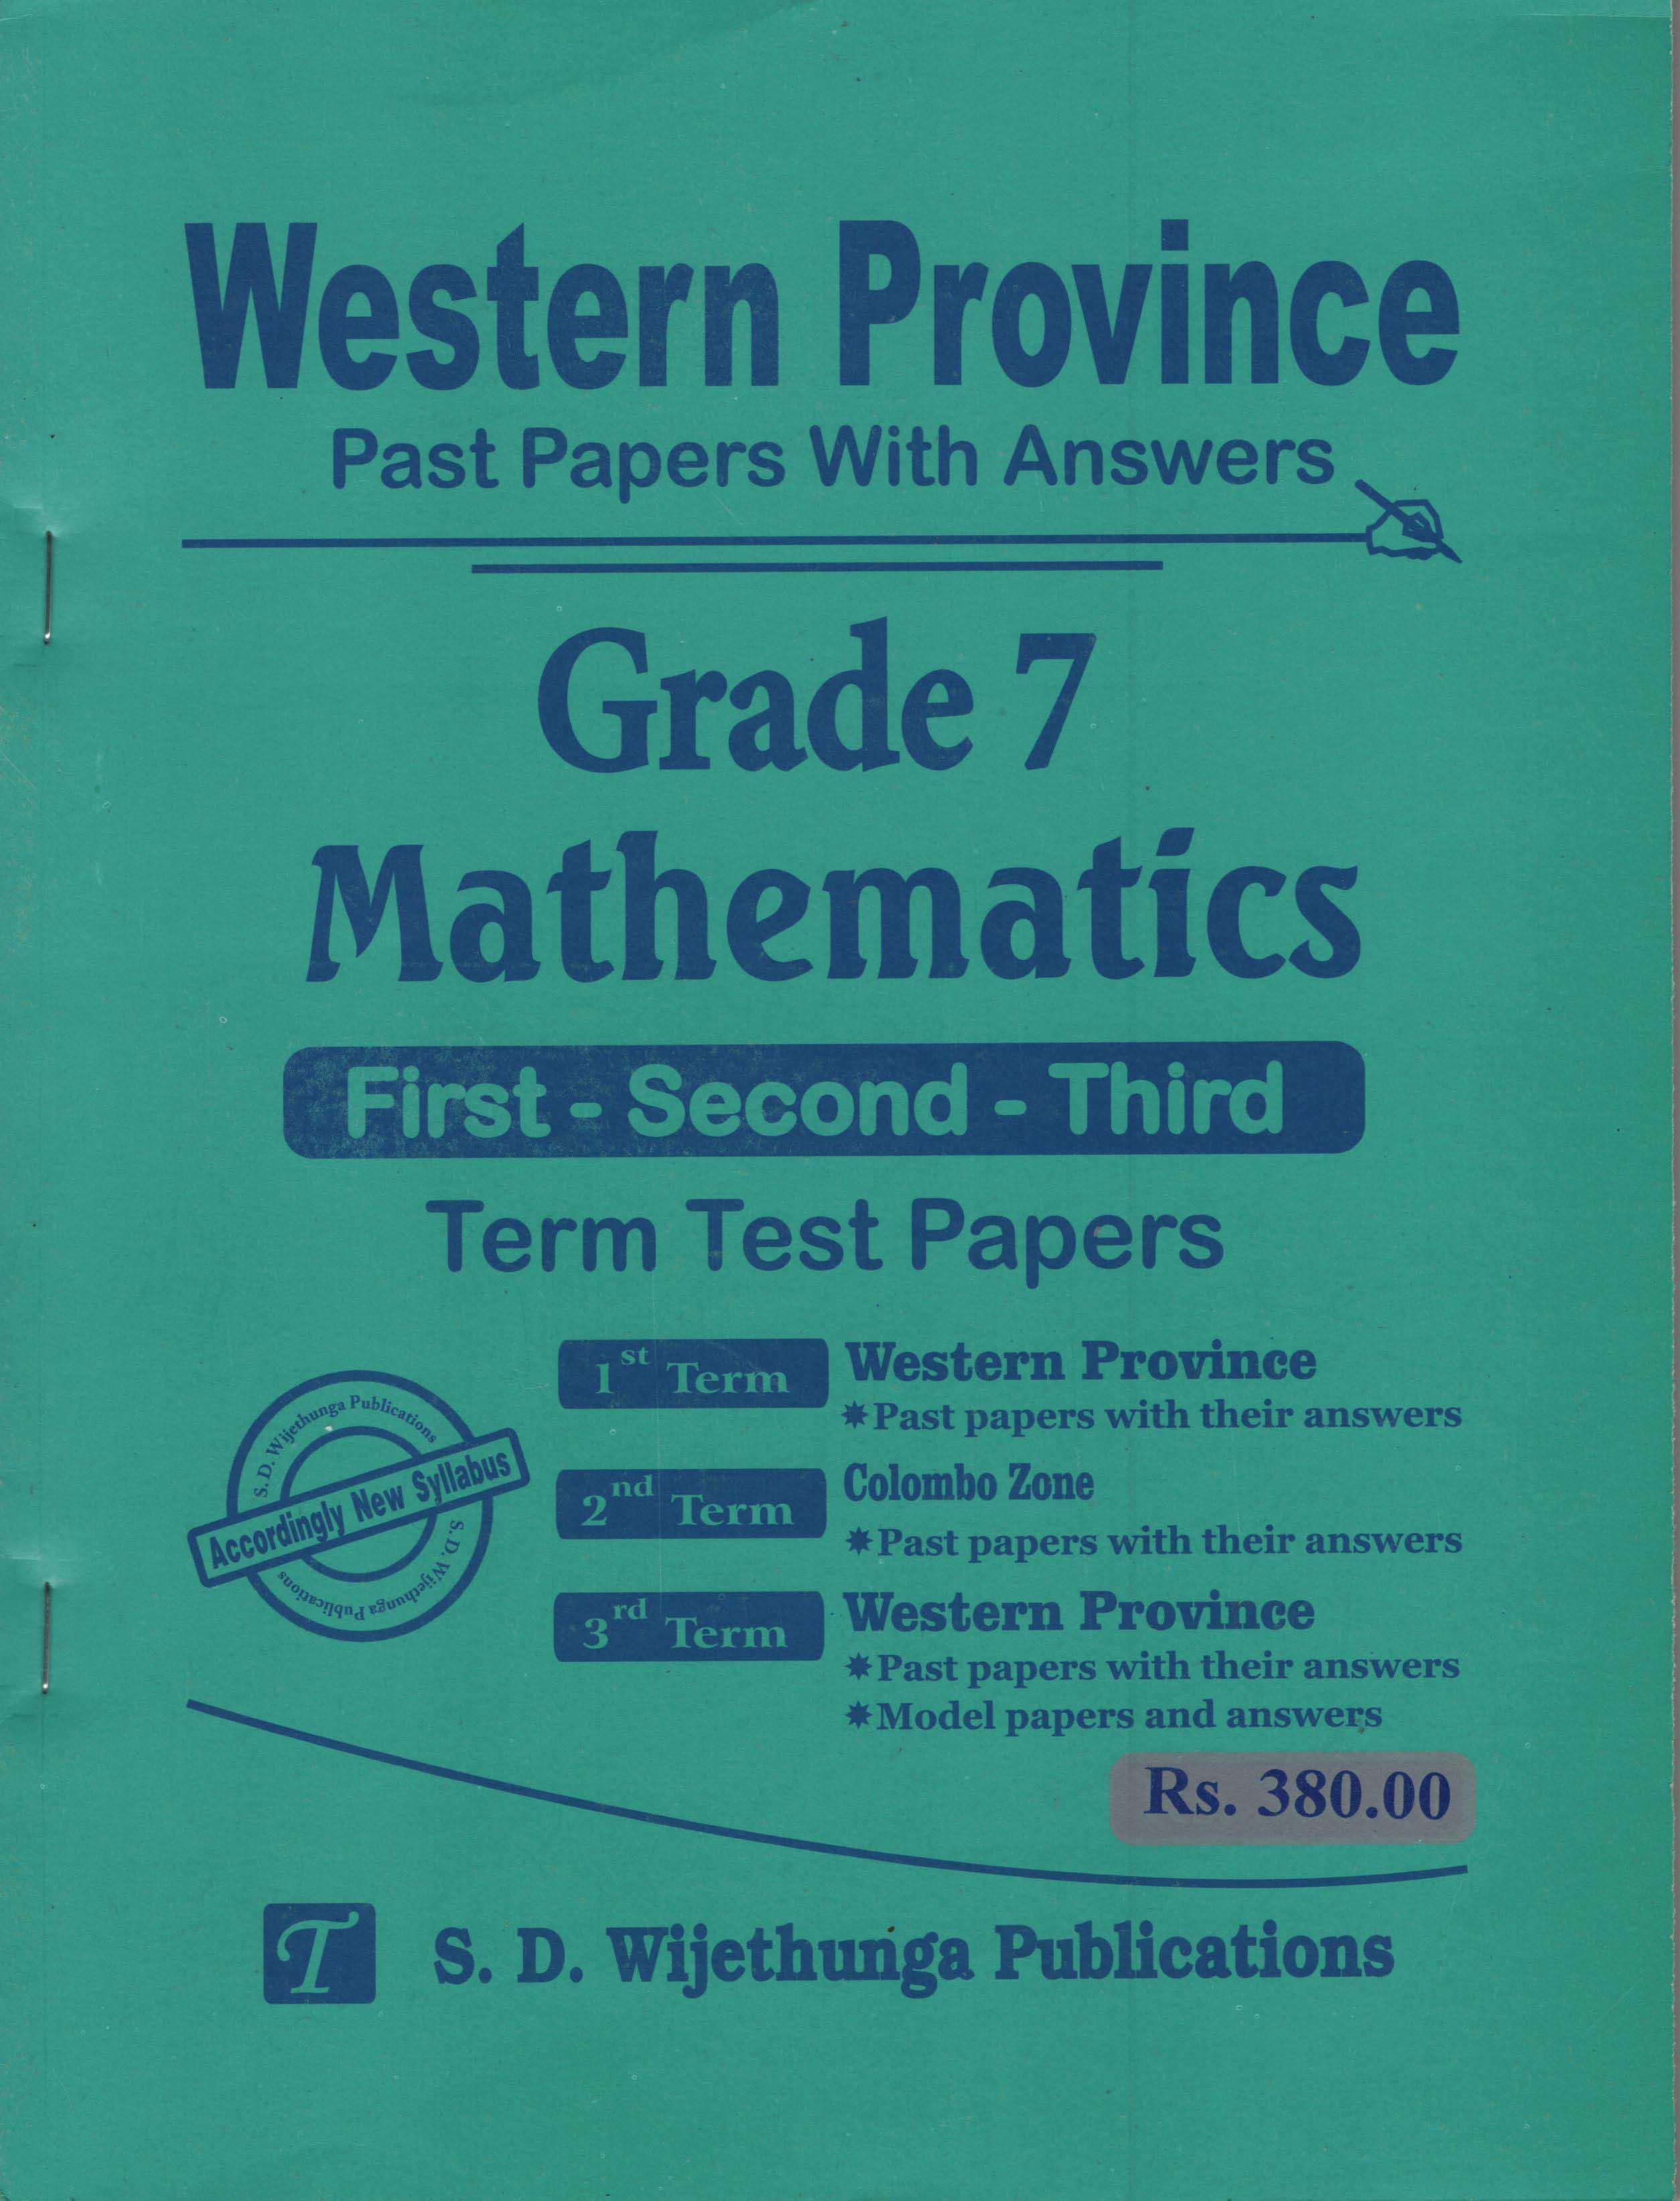 Western Province Past Papers with Answers Grade 7 Mathematics (First-Second-Third) Term Test Papers